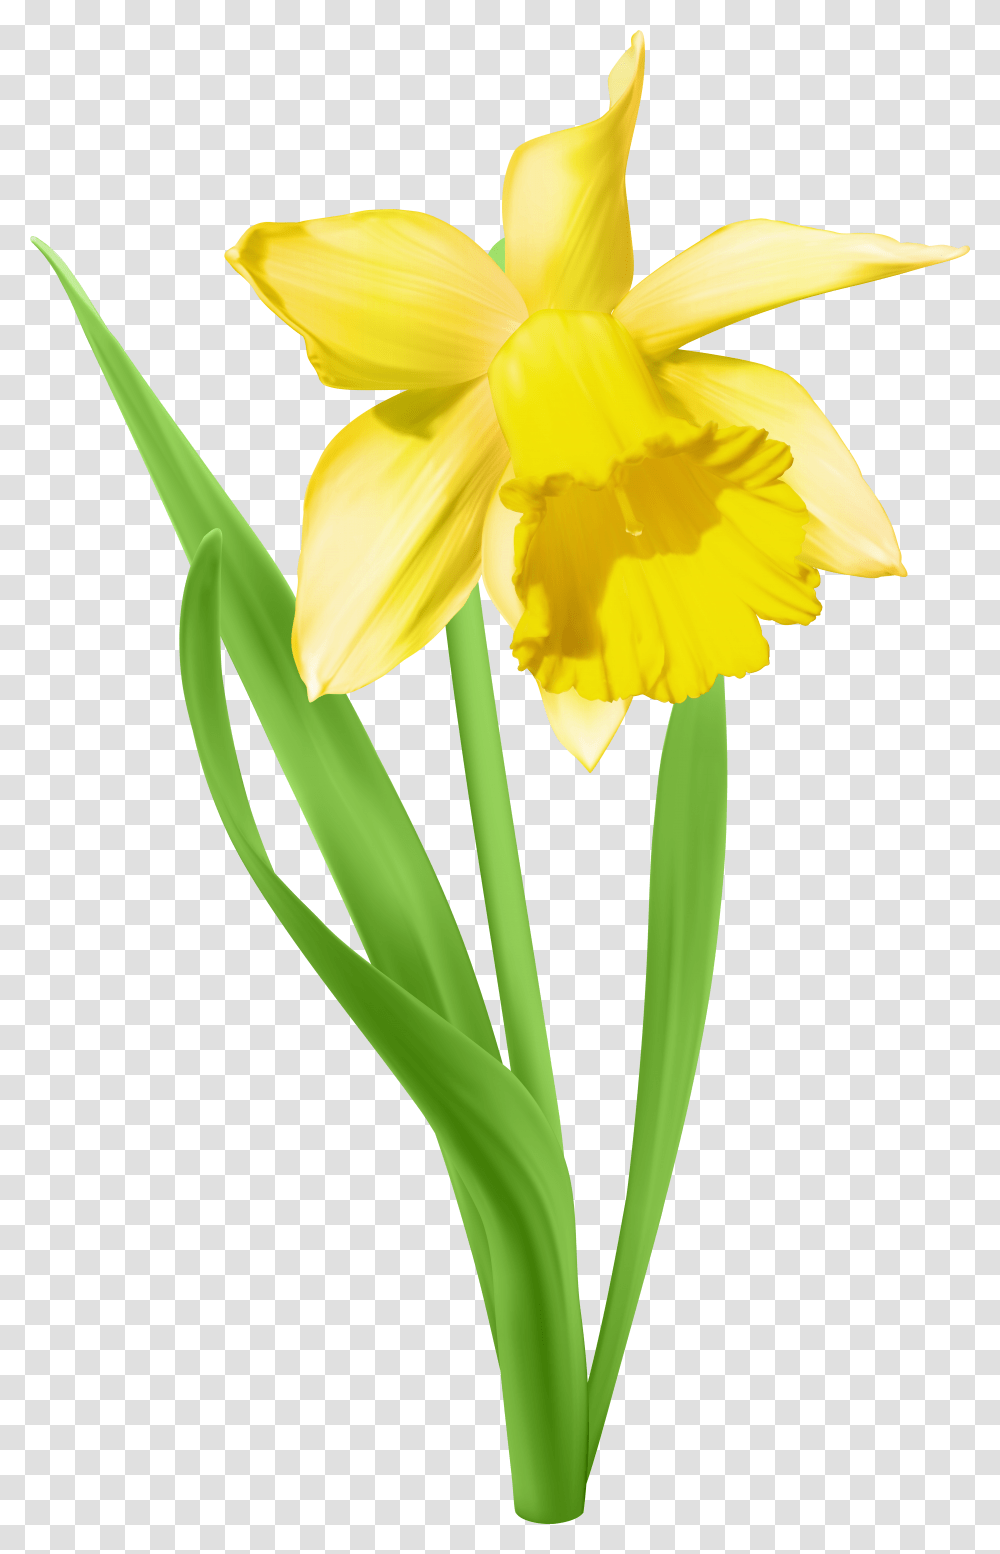 Daffodil Flower Clipart Svg Royalty Free Download Daffodil Background Daffodil Clip Art Transparent Png